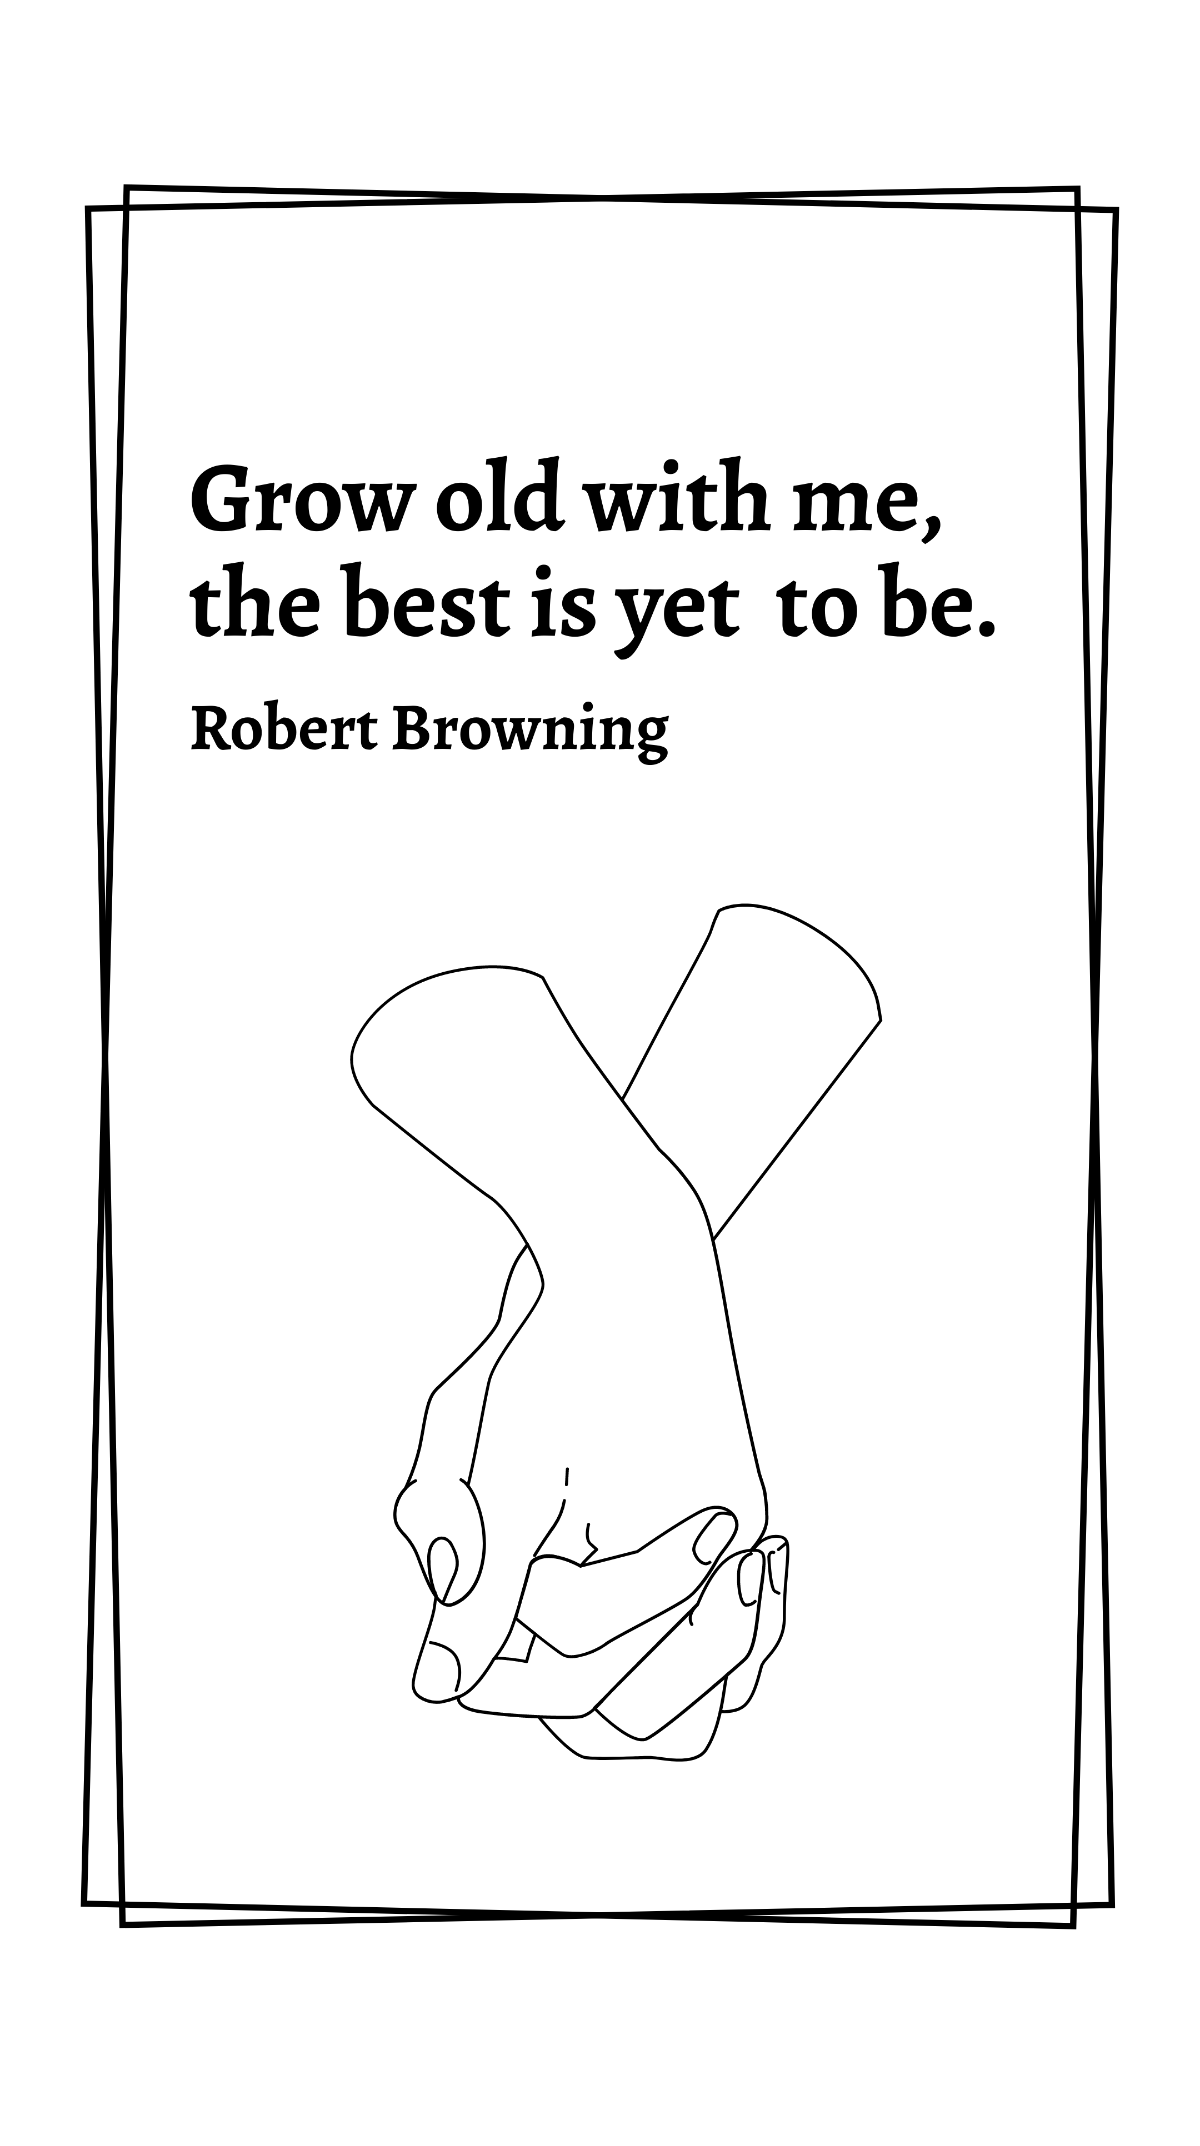 Robert Browning - Grow old with me, the best is yet to be.